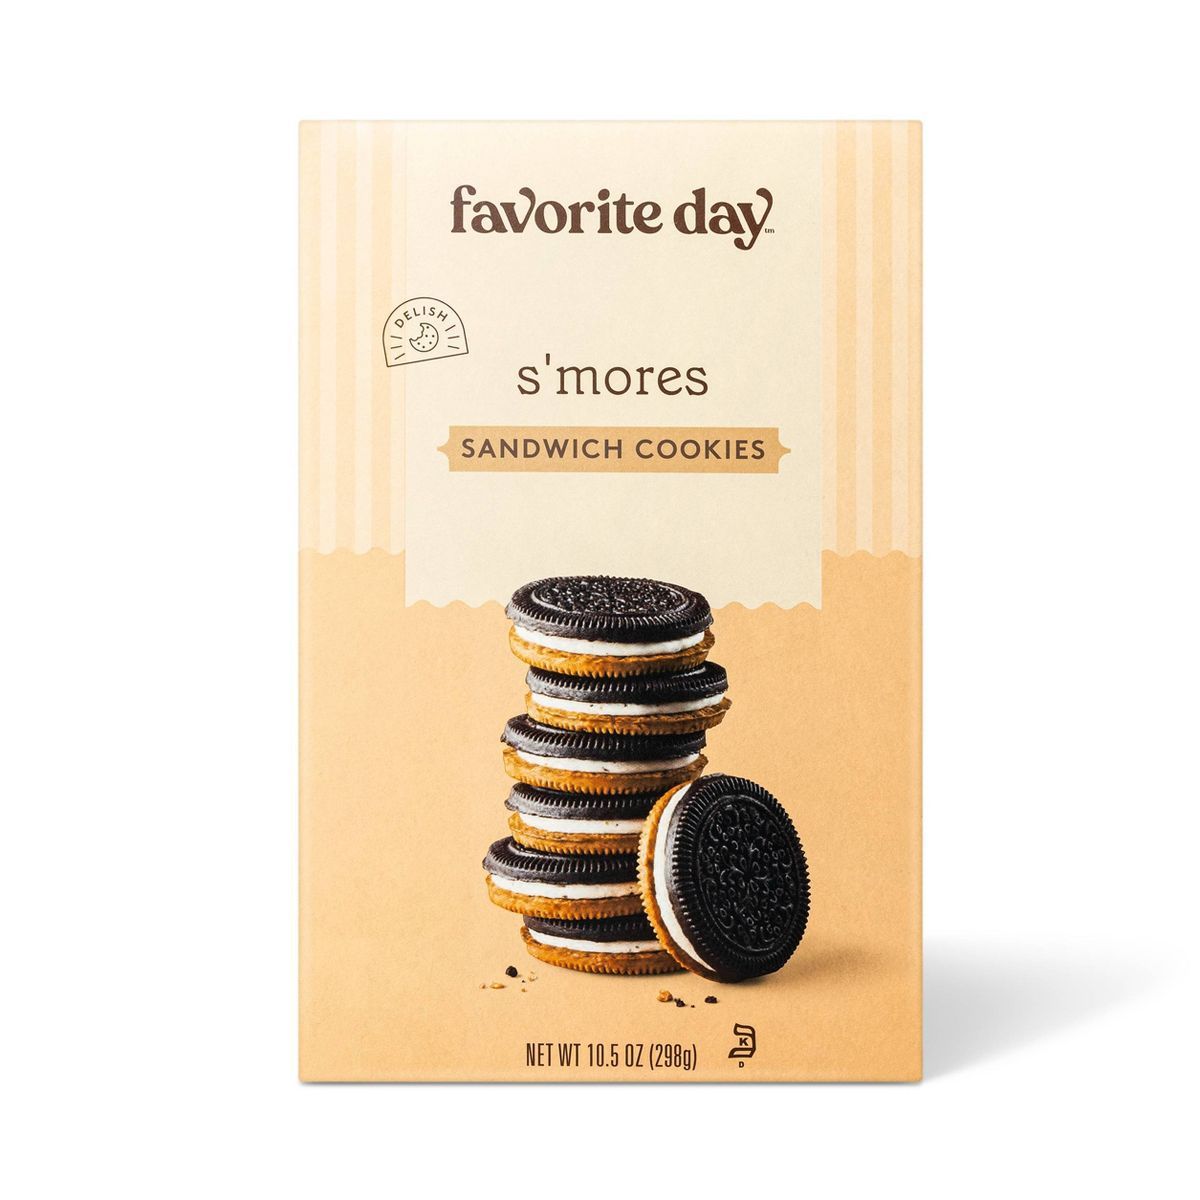 S'mores Sandwich Cookies - 10.5oz  - Favorite Day™ | Target